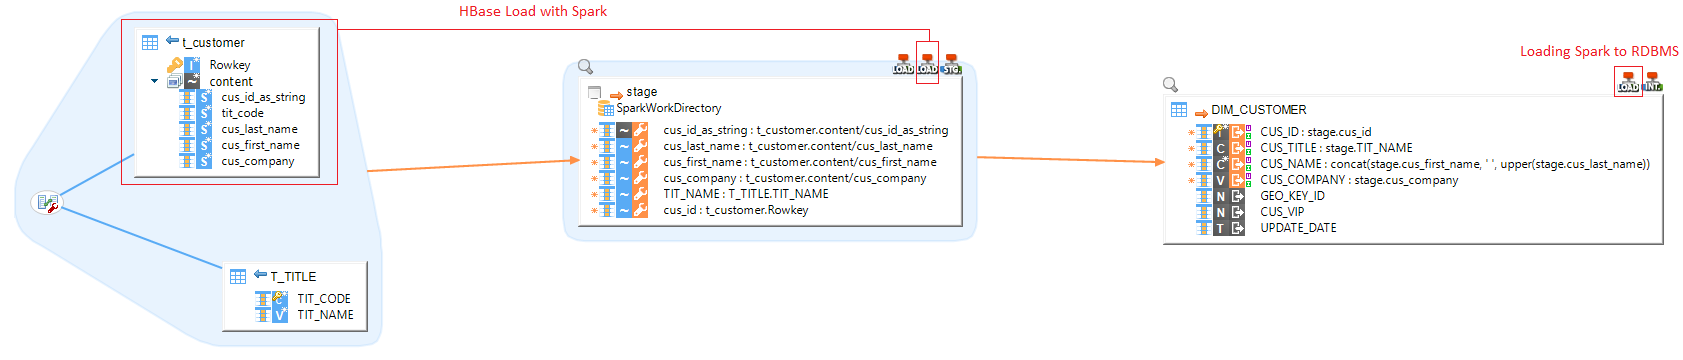 getting started spark mapping example hbase